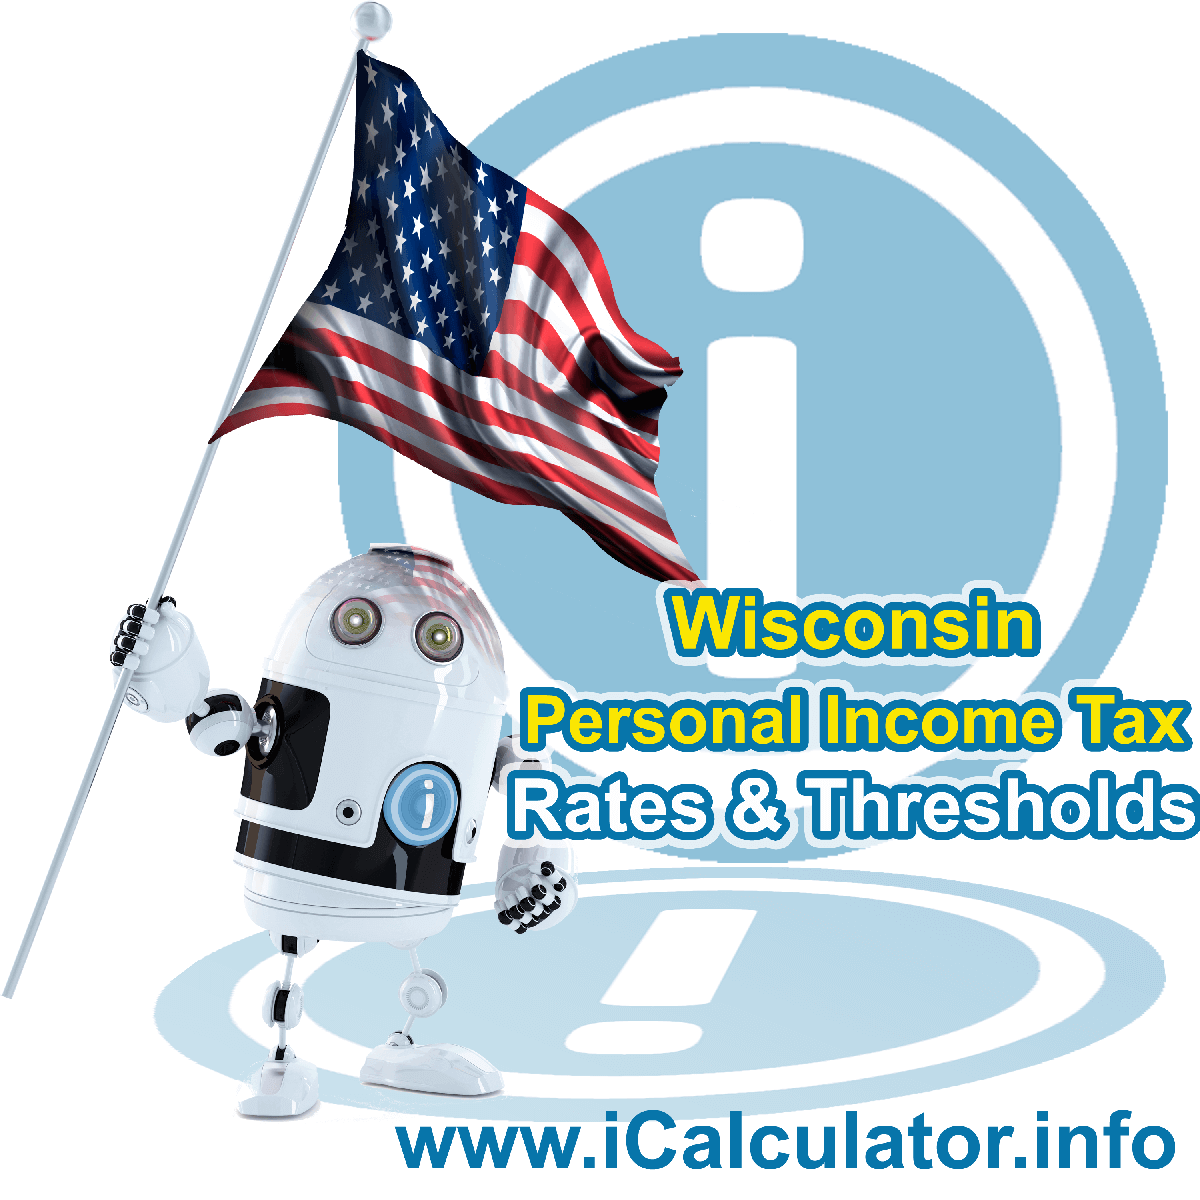 Wisconsin State Tax Tables 2021. This image displays details of the Wisconsin State Tax Tables for the 2021 tax return year which is provided in support of the 2021 US Tax Calculator